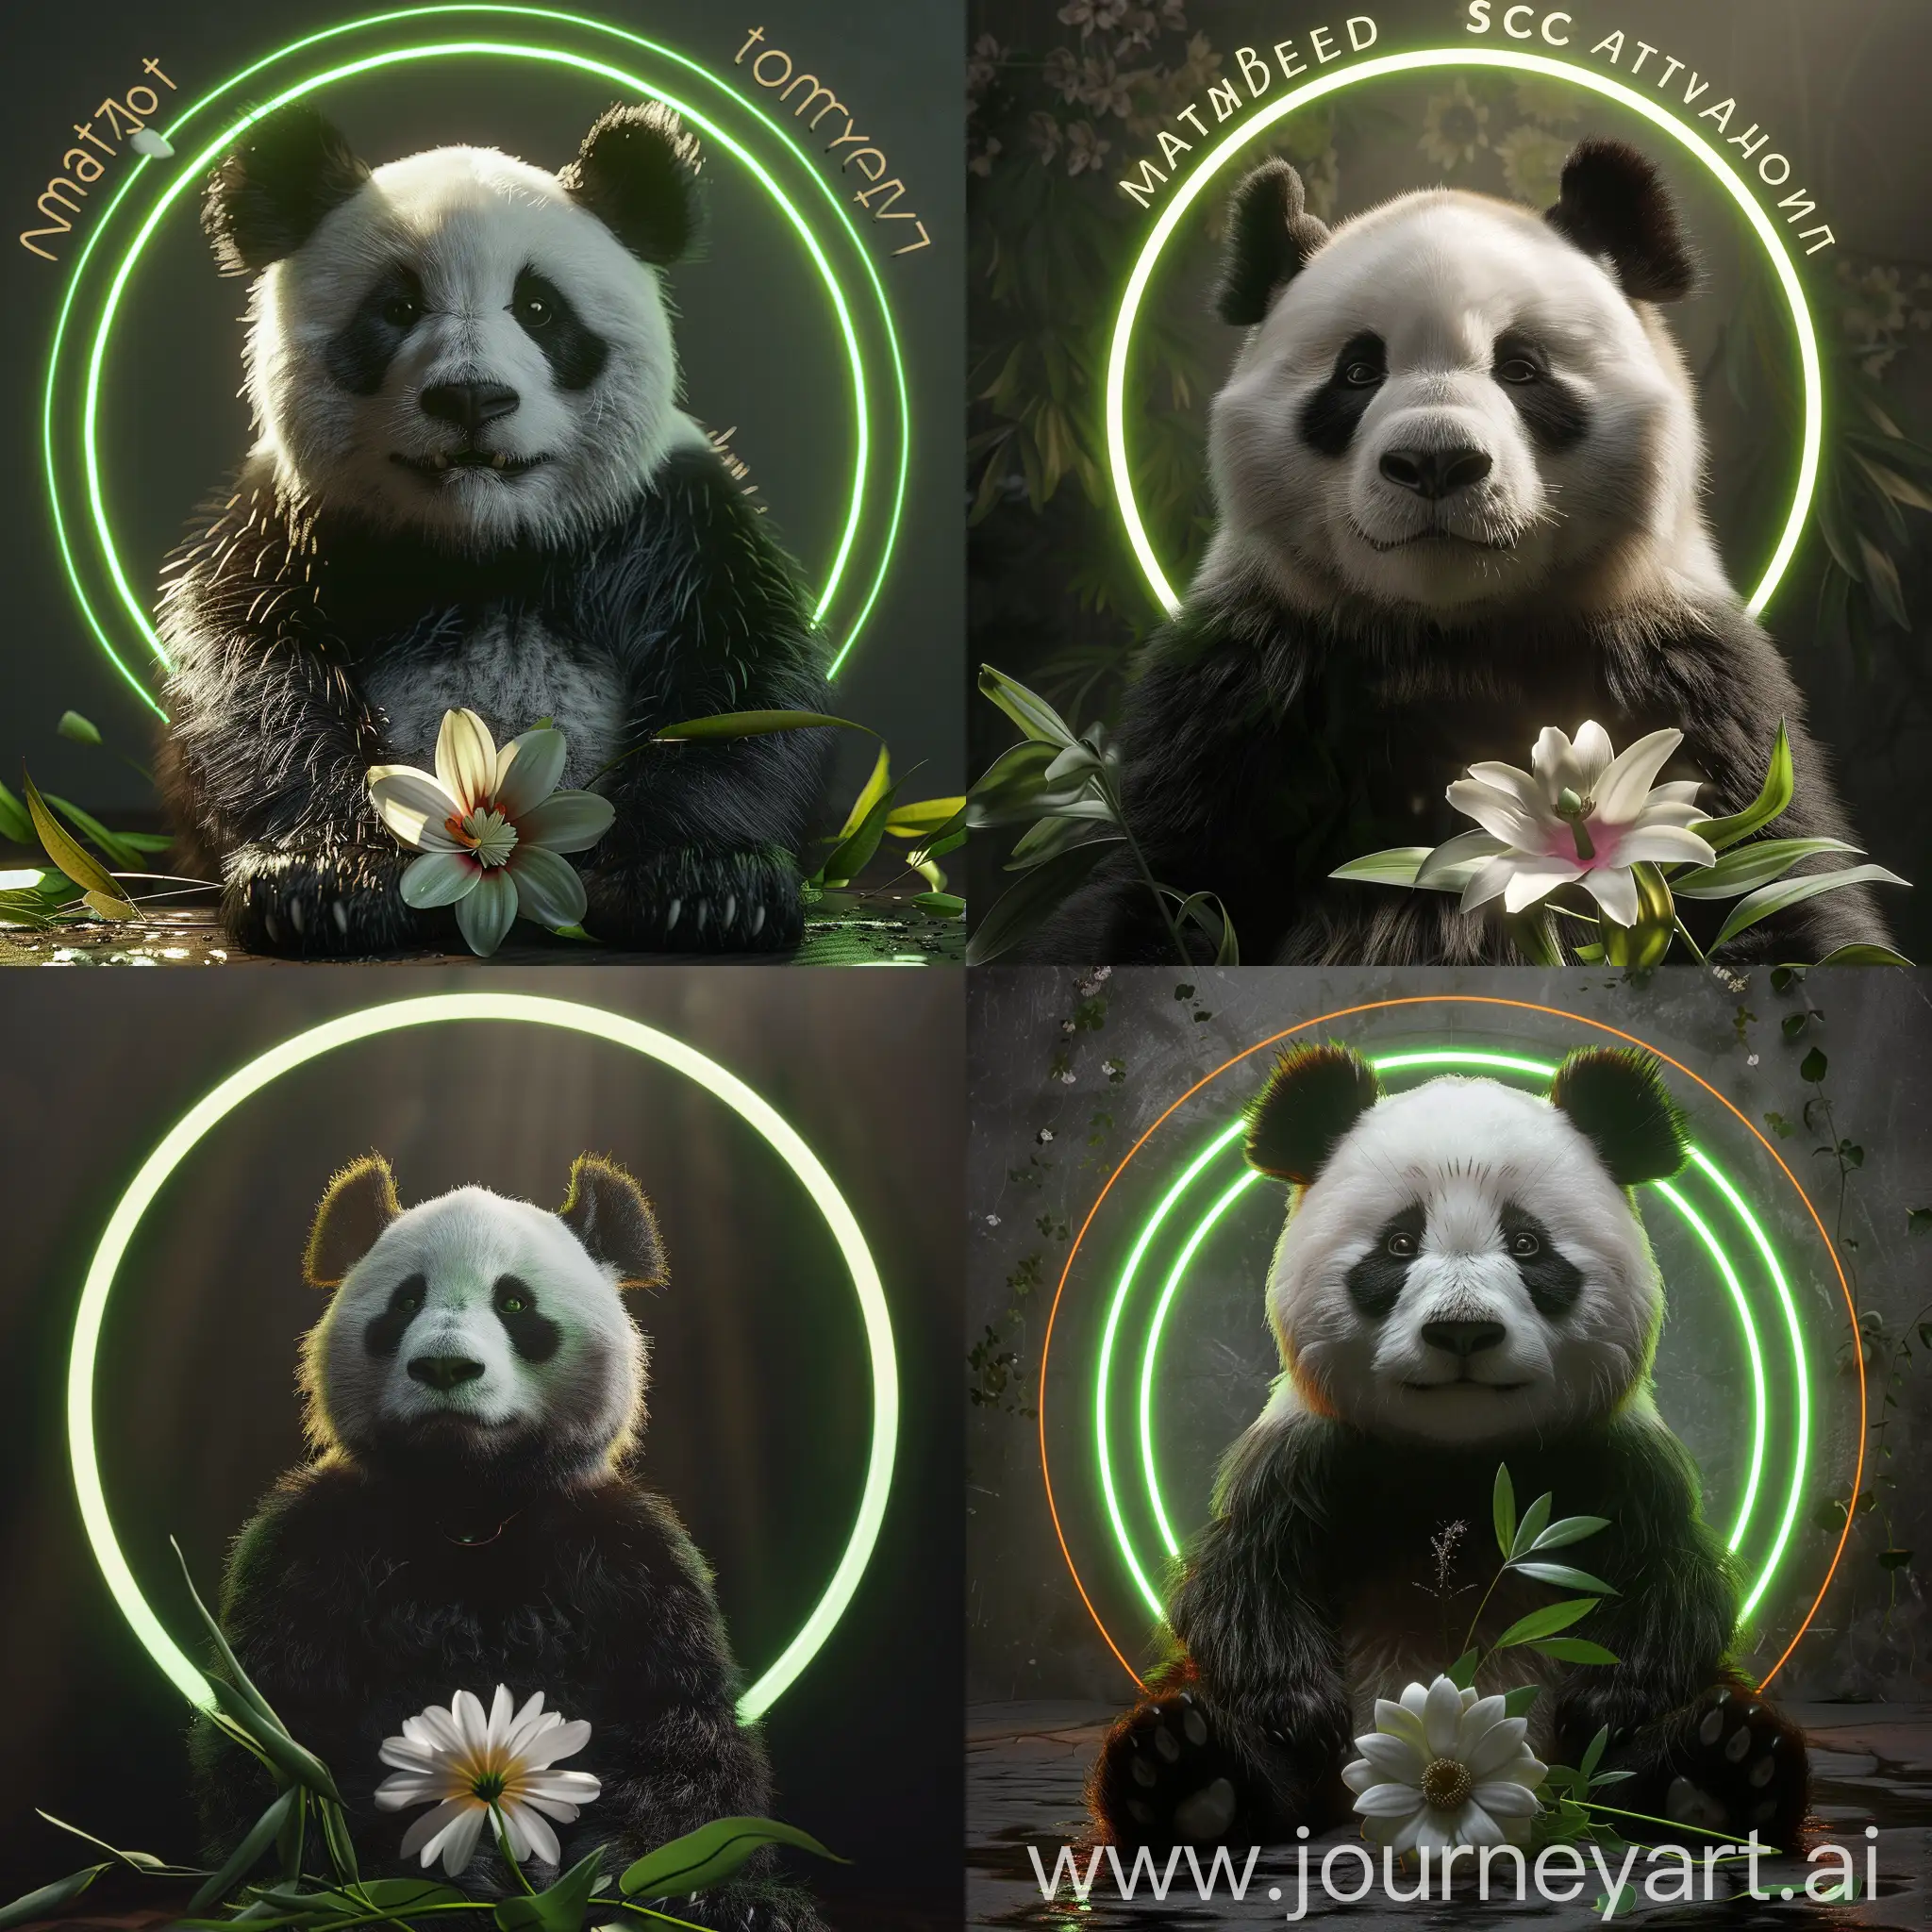 Romantic-Panda-Bear-Surrounded-by-Green-Circle-and-Flower